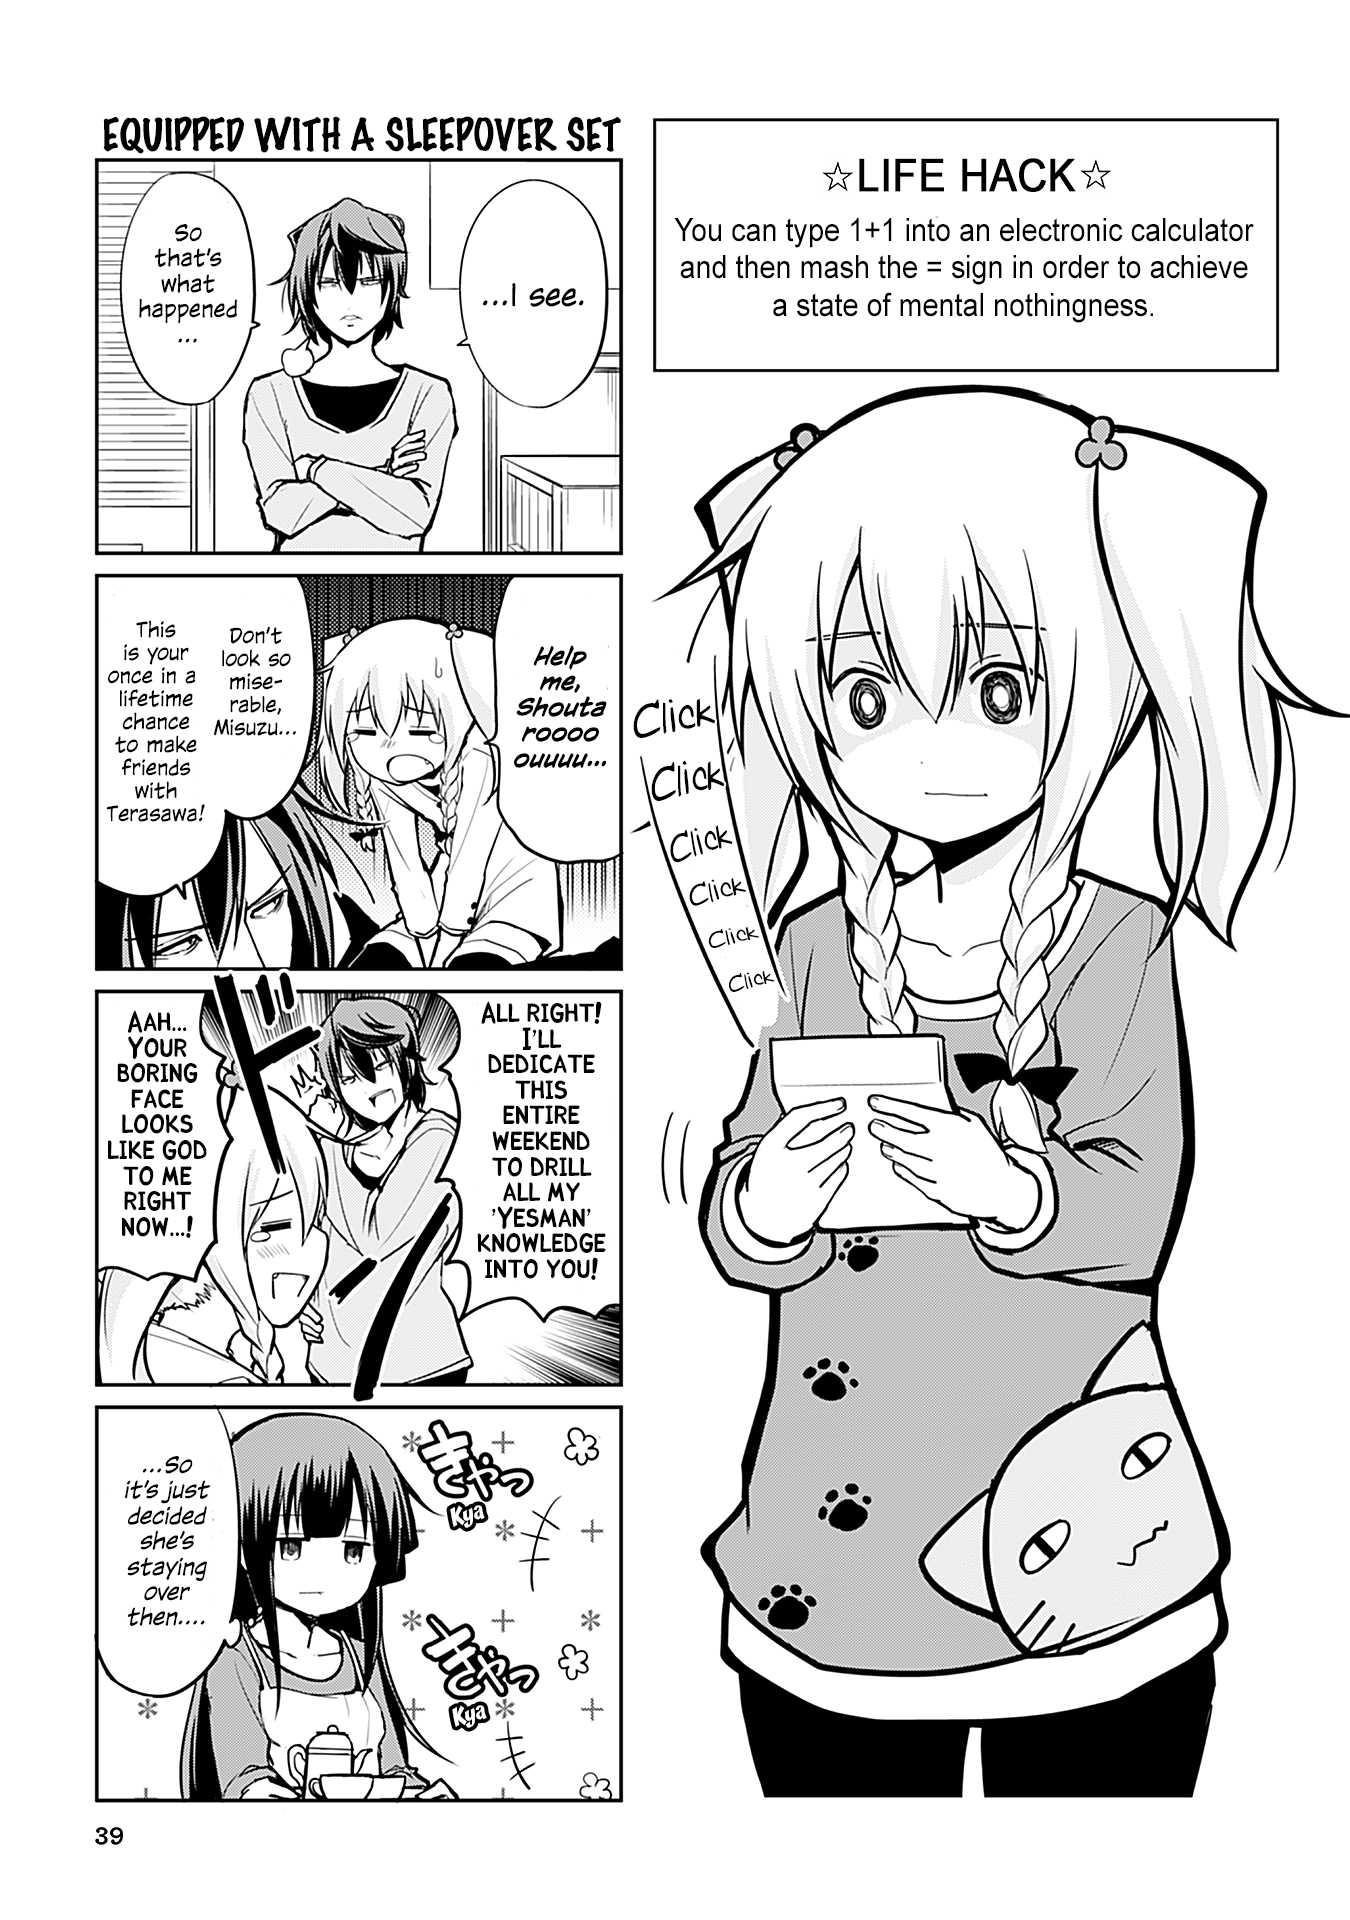 Tomodachi o Tsukurou Vol.2 Chapter 232: Equipped with a sleepover set